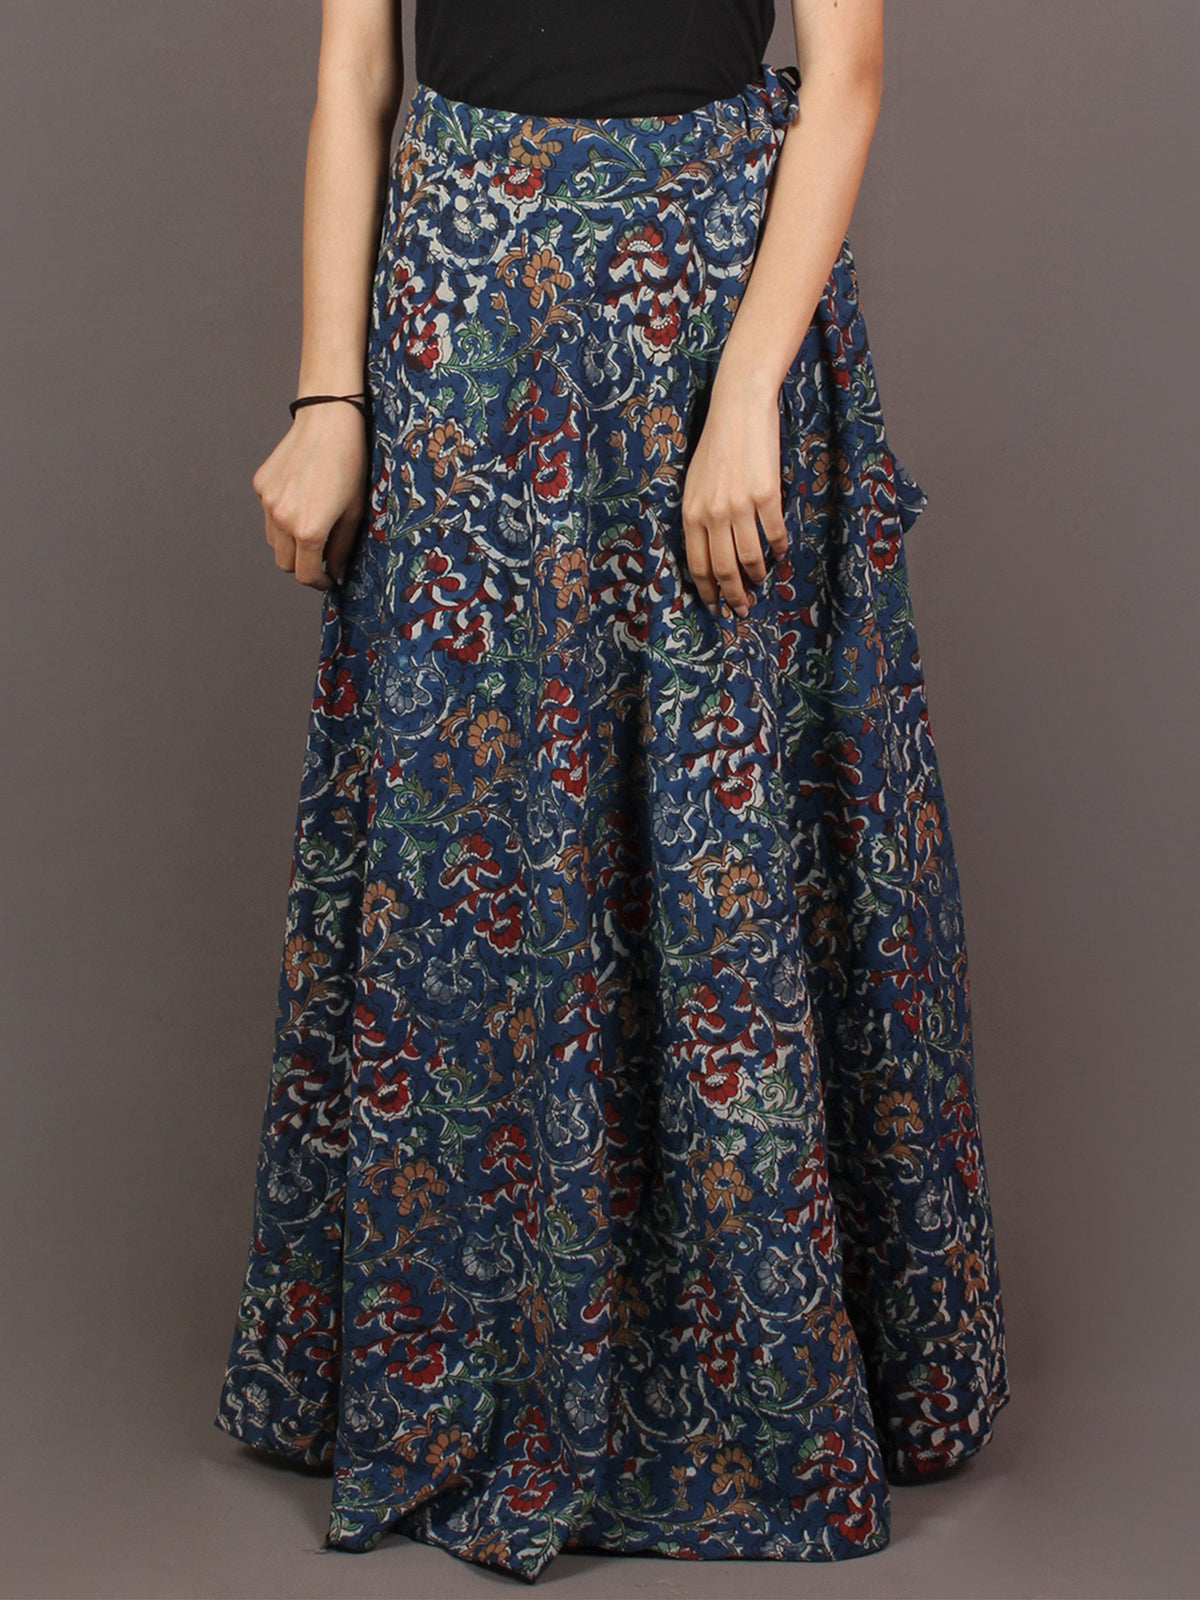 Hand Block Printed Wrap Around Skirt In Blue Multi Colour - S401008